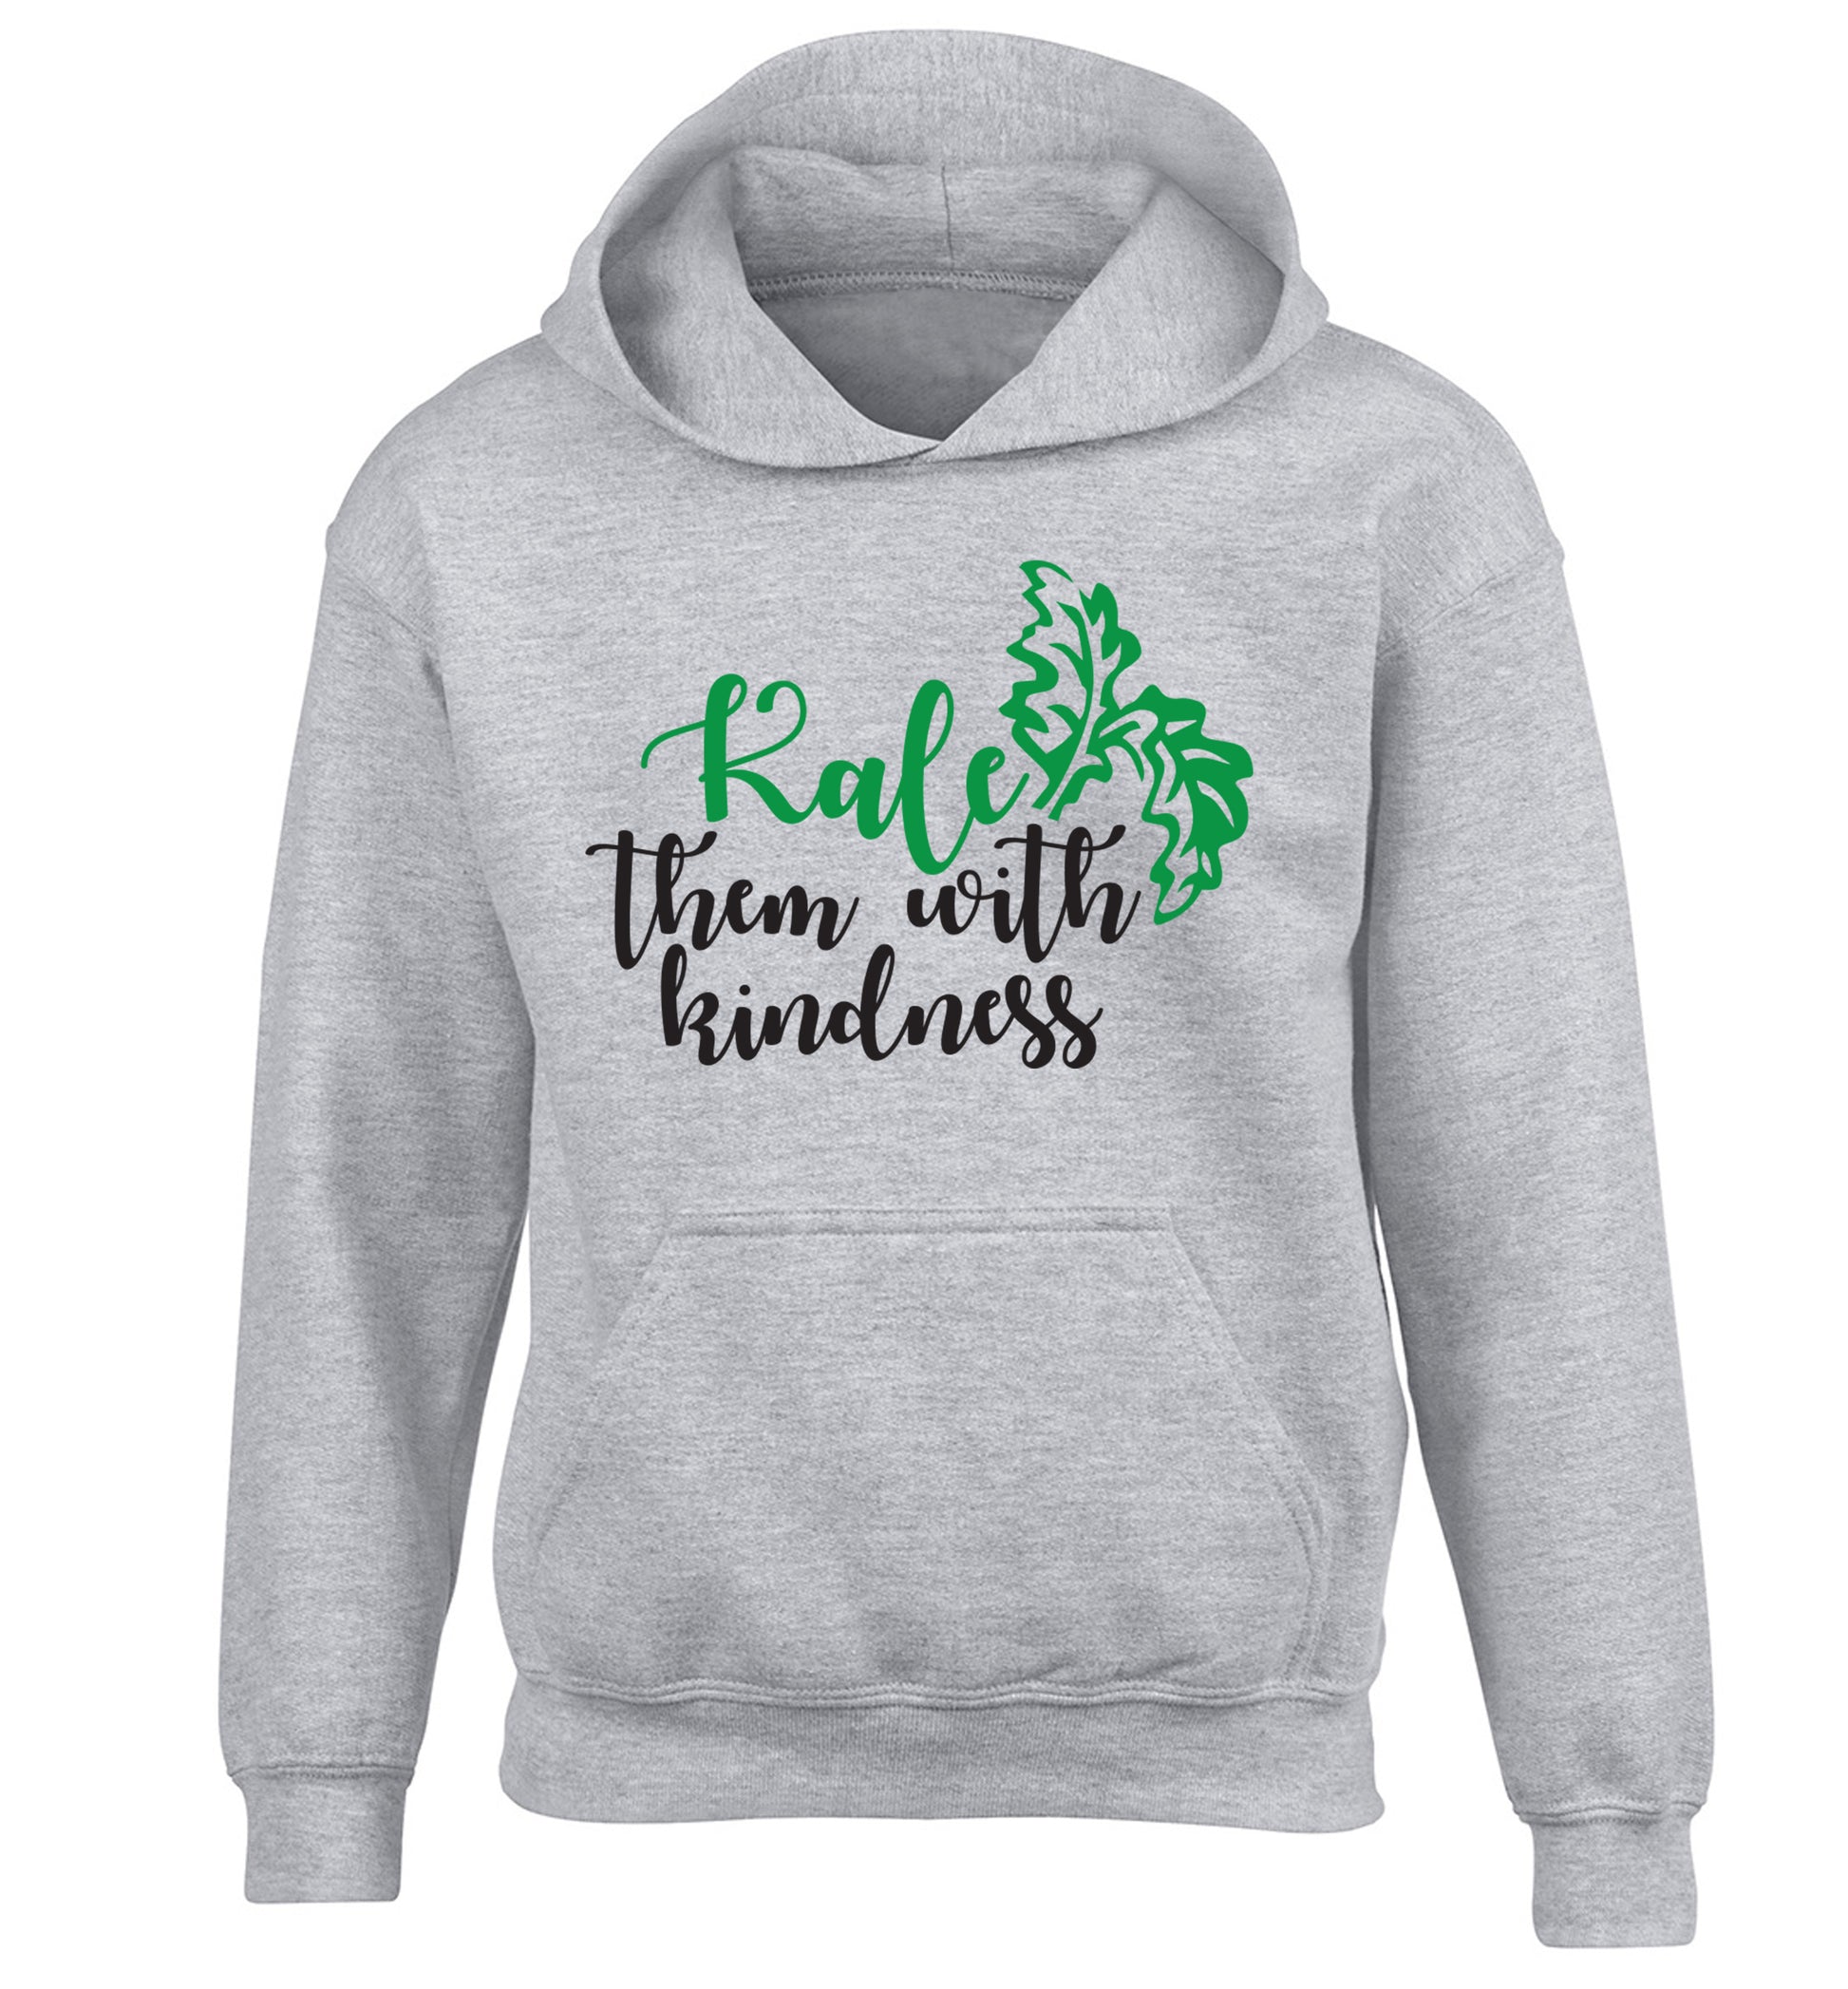 Kale them with kindness children's grey hoodie 12-14 Years